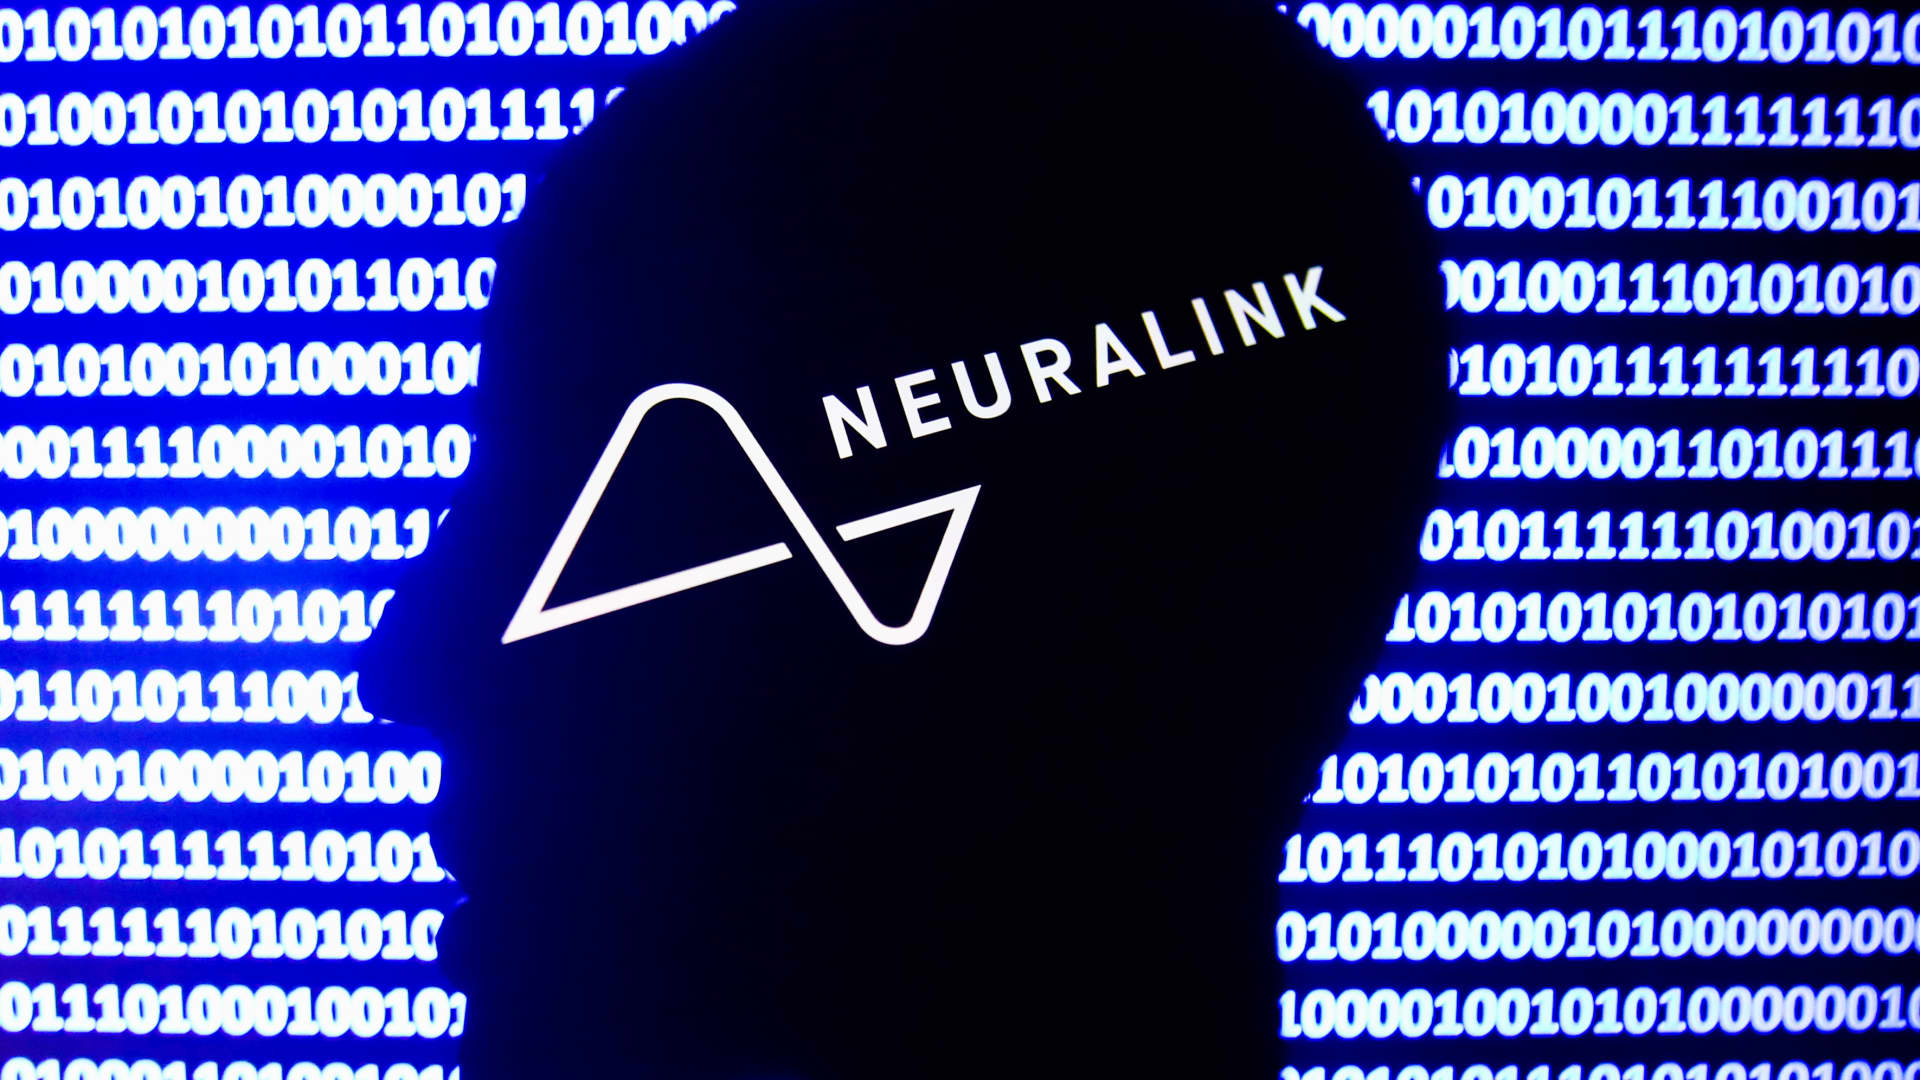 Musk states he’ll set a Neuralink chip in his mind when they are ready